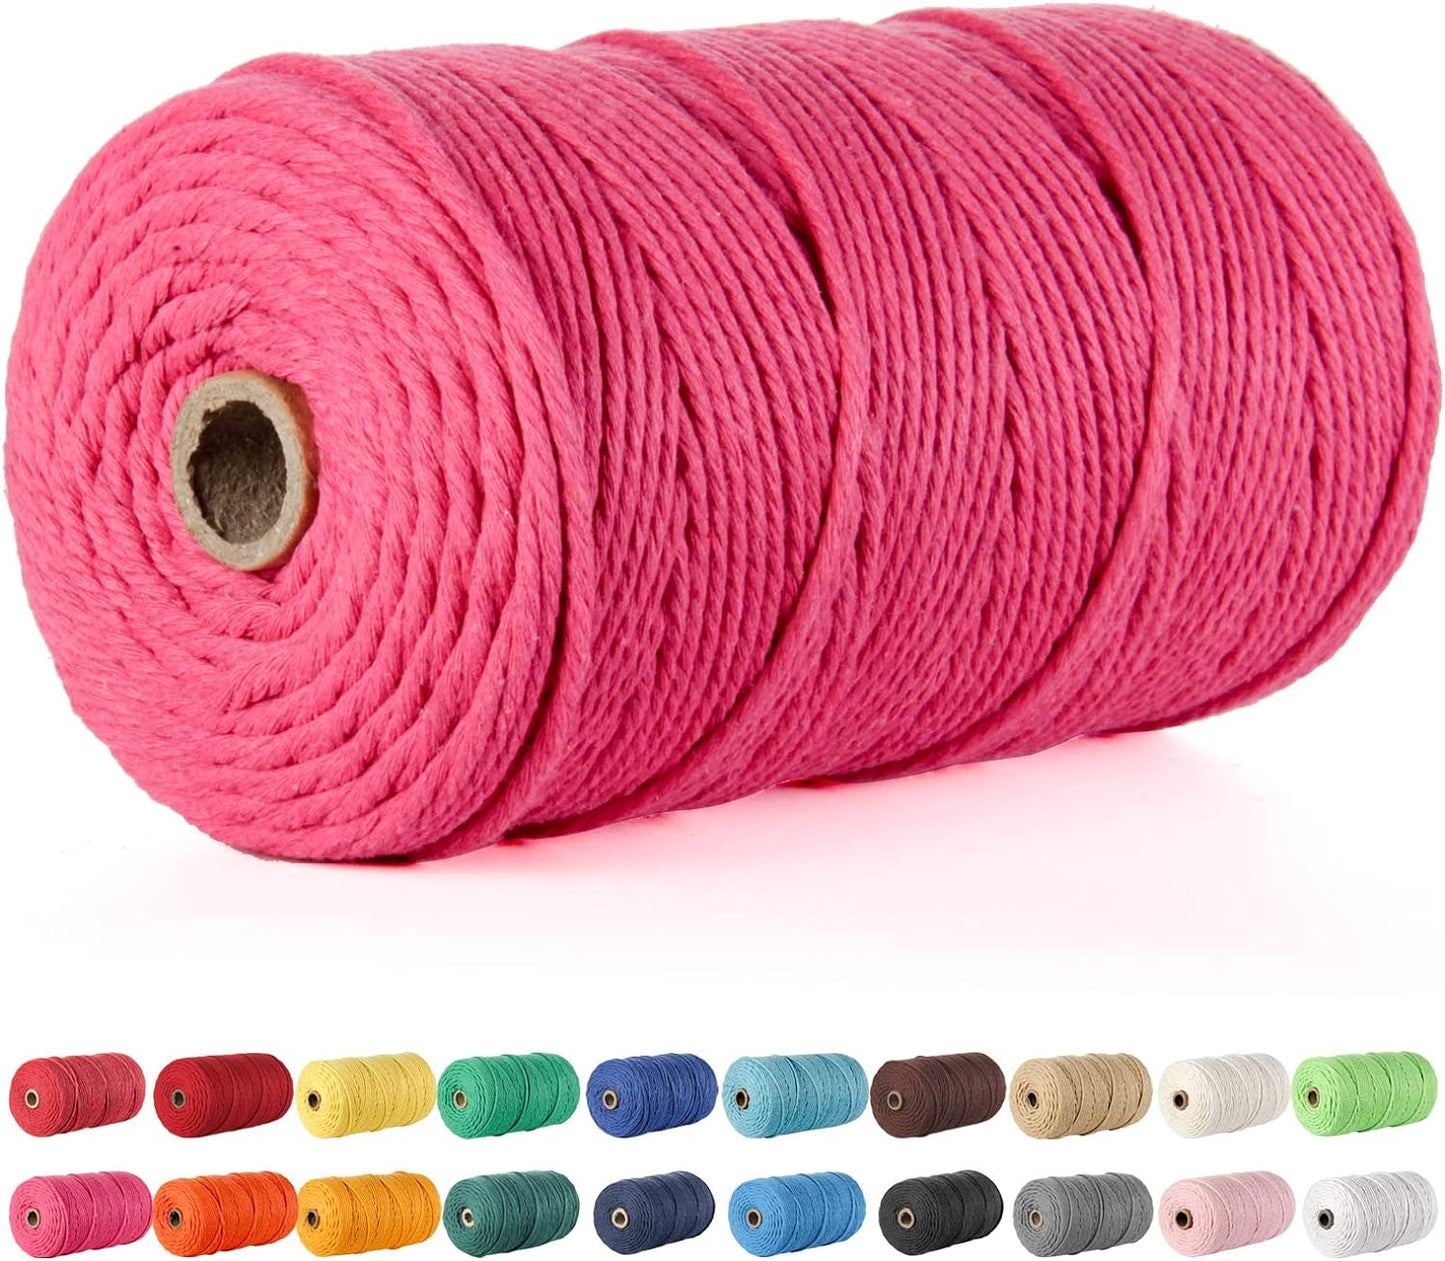 Macrame Cord,  3Mm X 220 Yards (About 200M) Cotton Rope,100% Natural Cotton Macrame Rope for Wall Hanging, Plant Hangers, DIY Crafts Knitting, Christmas Wedding Decorative Projects (Rose Red)